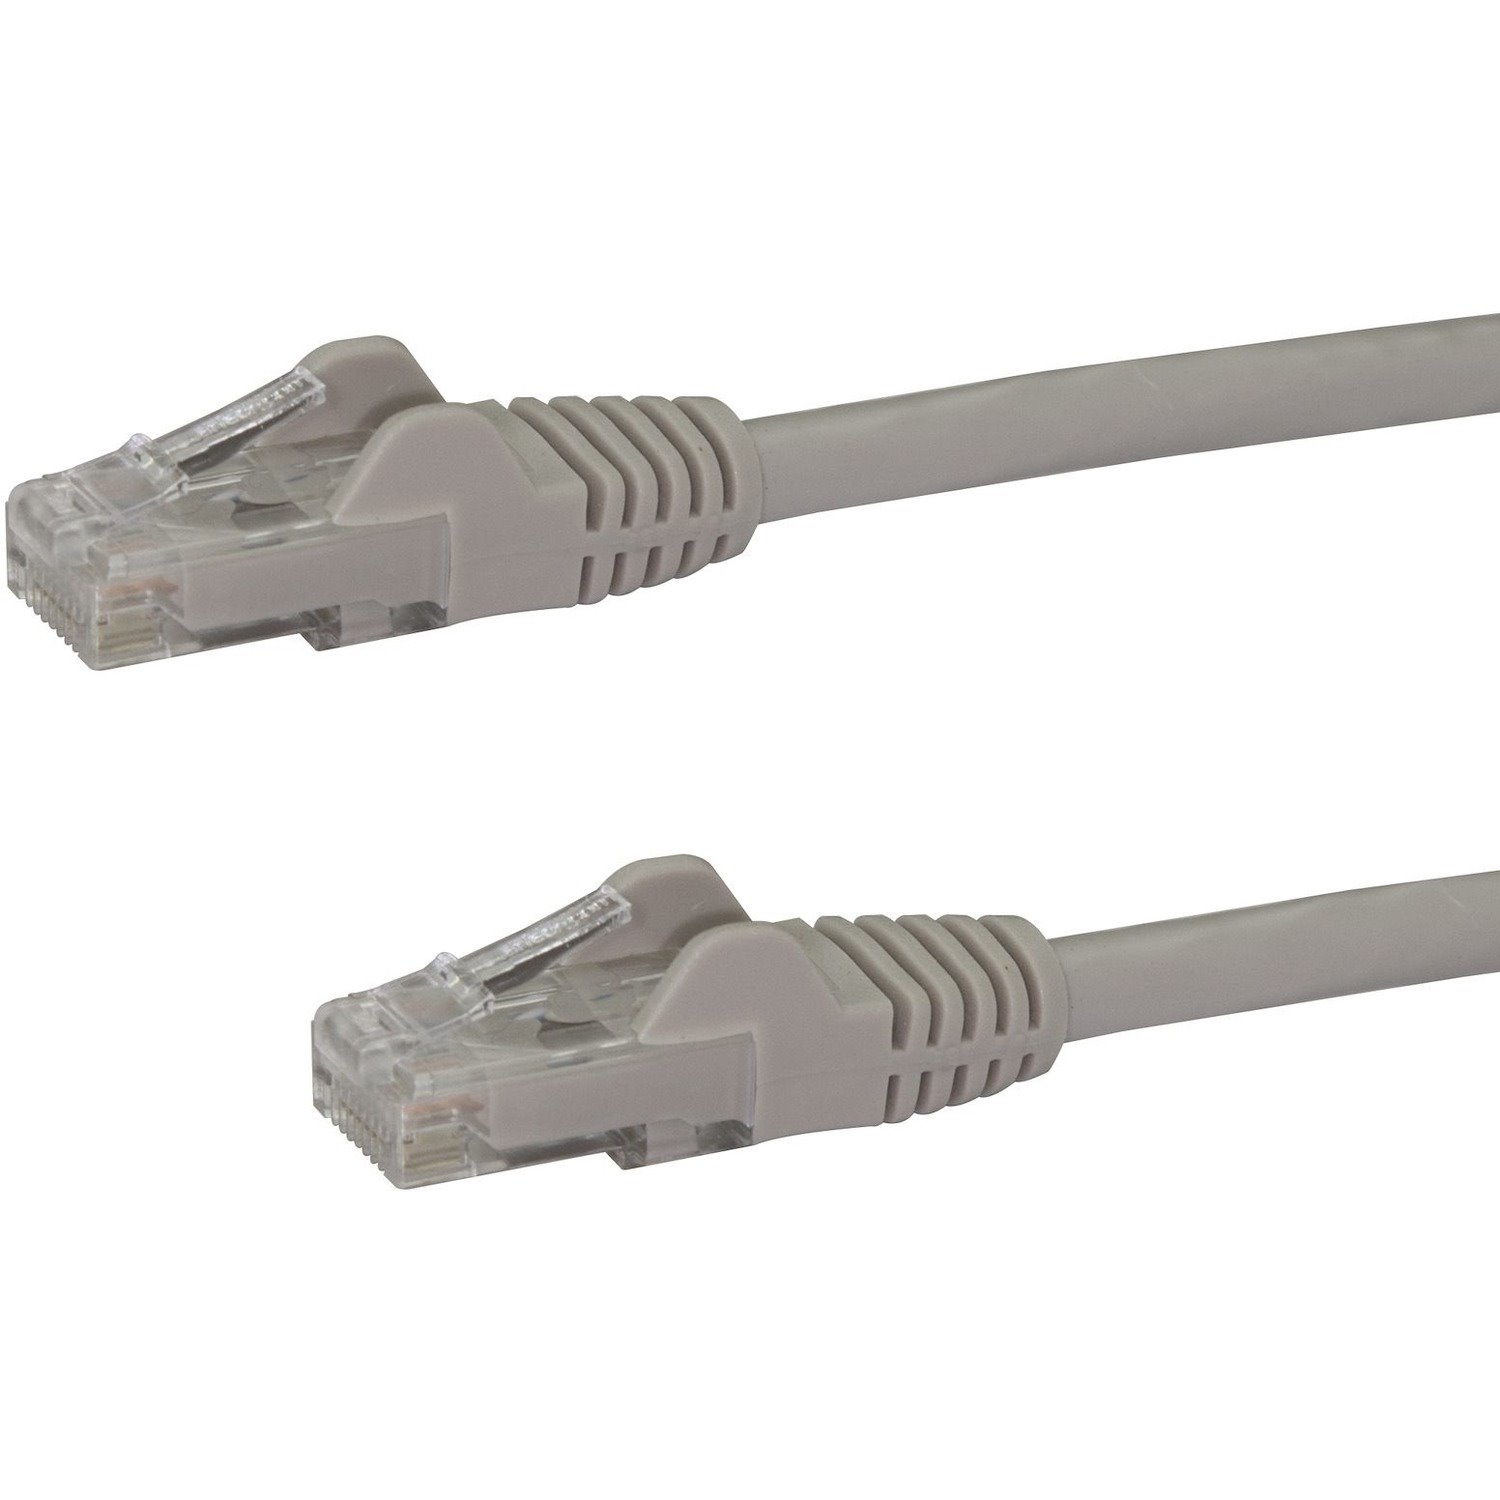 StarTech.com 25ft CAT6 Ethernet Cable - Gray Snagless Gigabit - 100W PoE UTP 650MHz Category 6 Patch Cord UL Certified Wiring/TIA